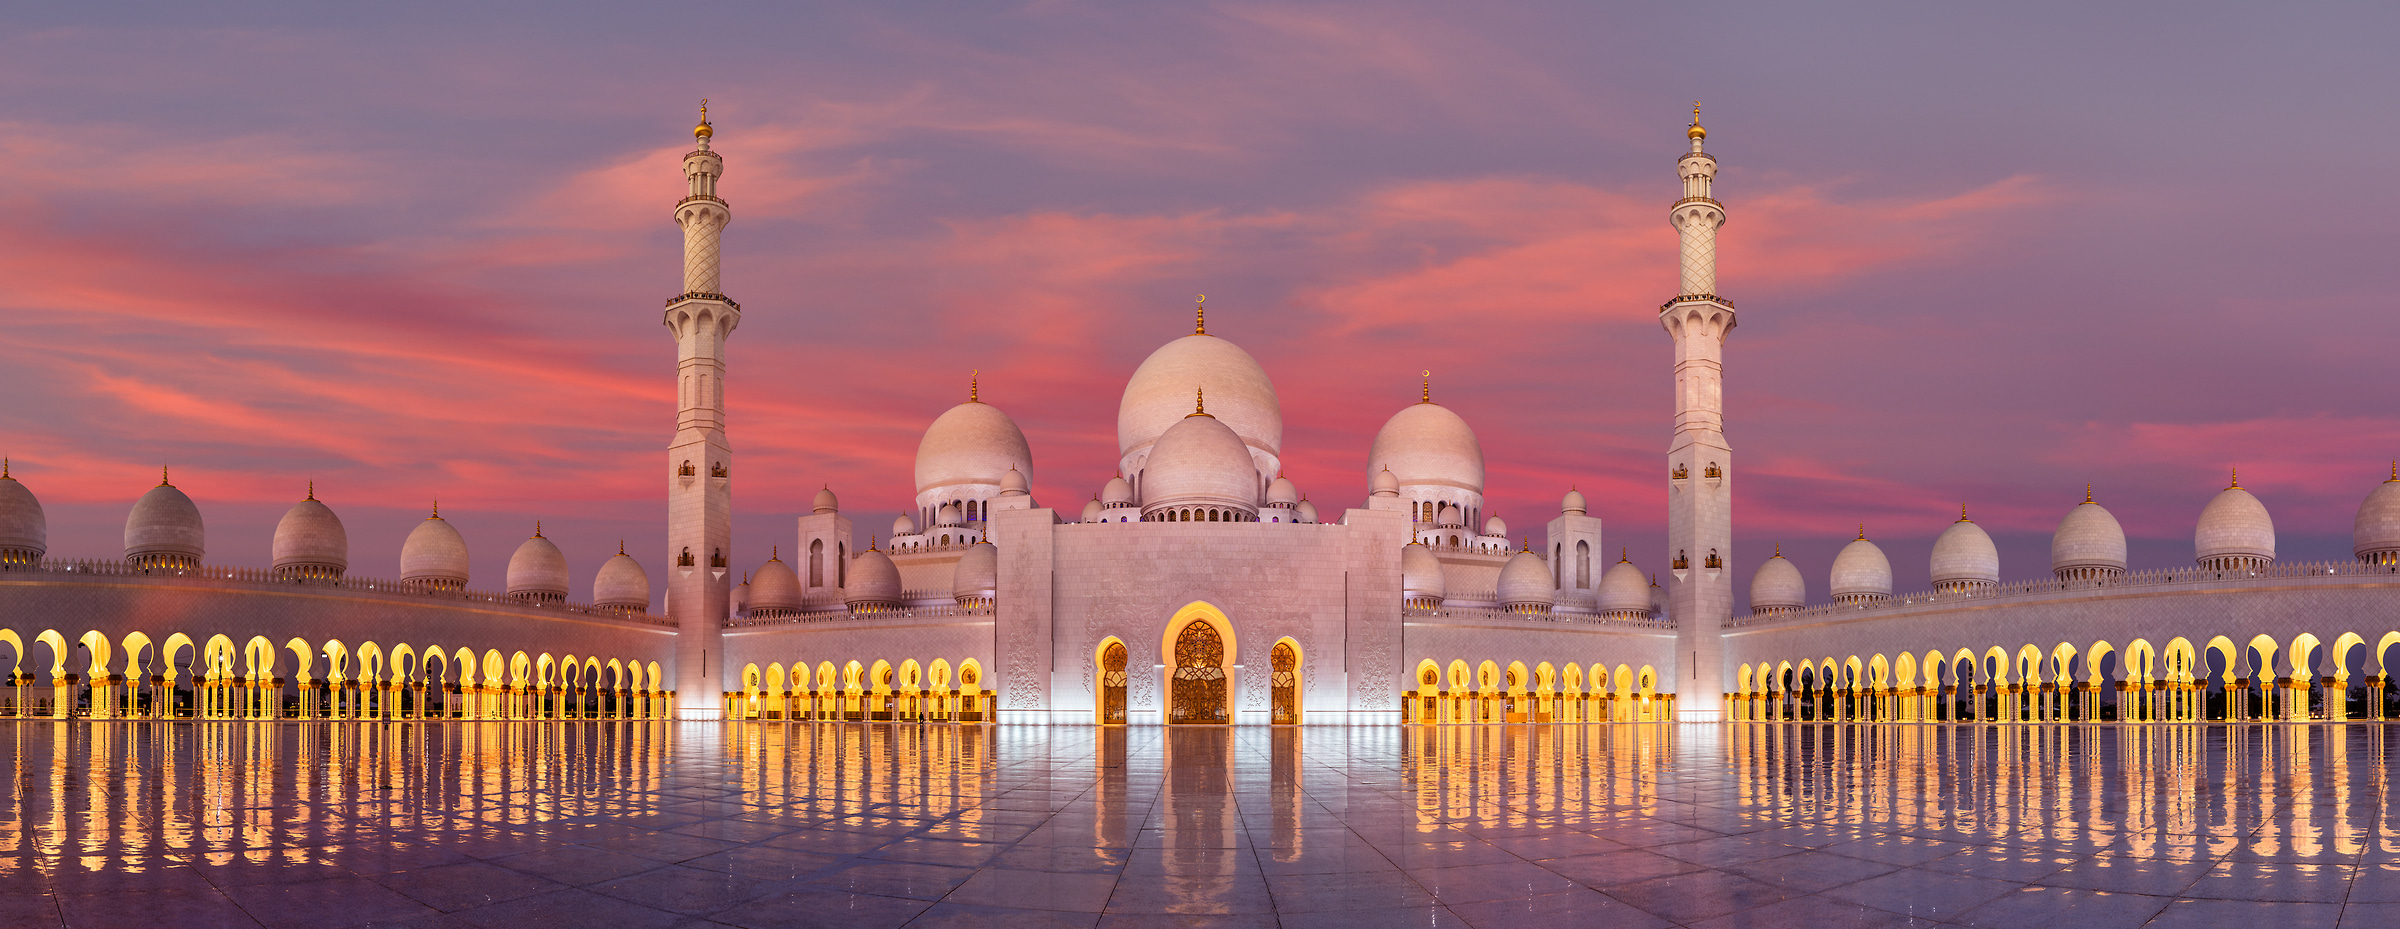 1,296 megapixels! A very high resolution, large-format photo of the Sheikh Zayed Grand Mosque in Anu Dhabi at sunrise; fine art photograph created by Chris Collacott in the United Arab Emirates